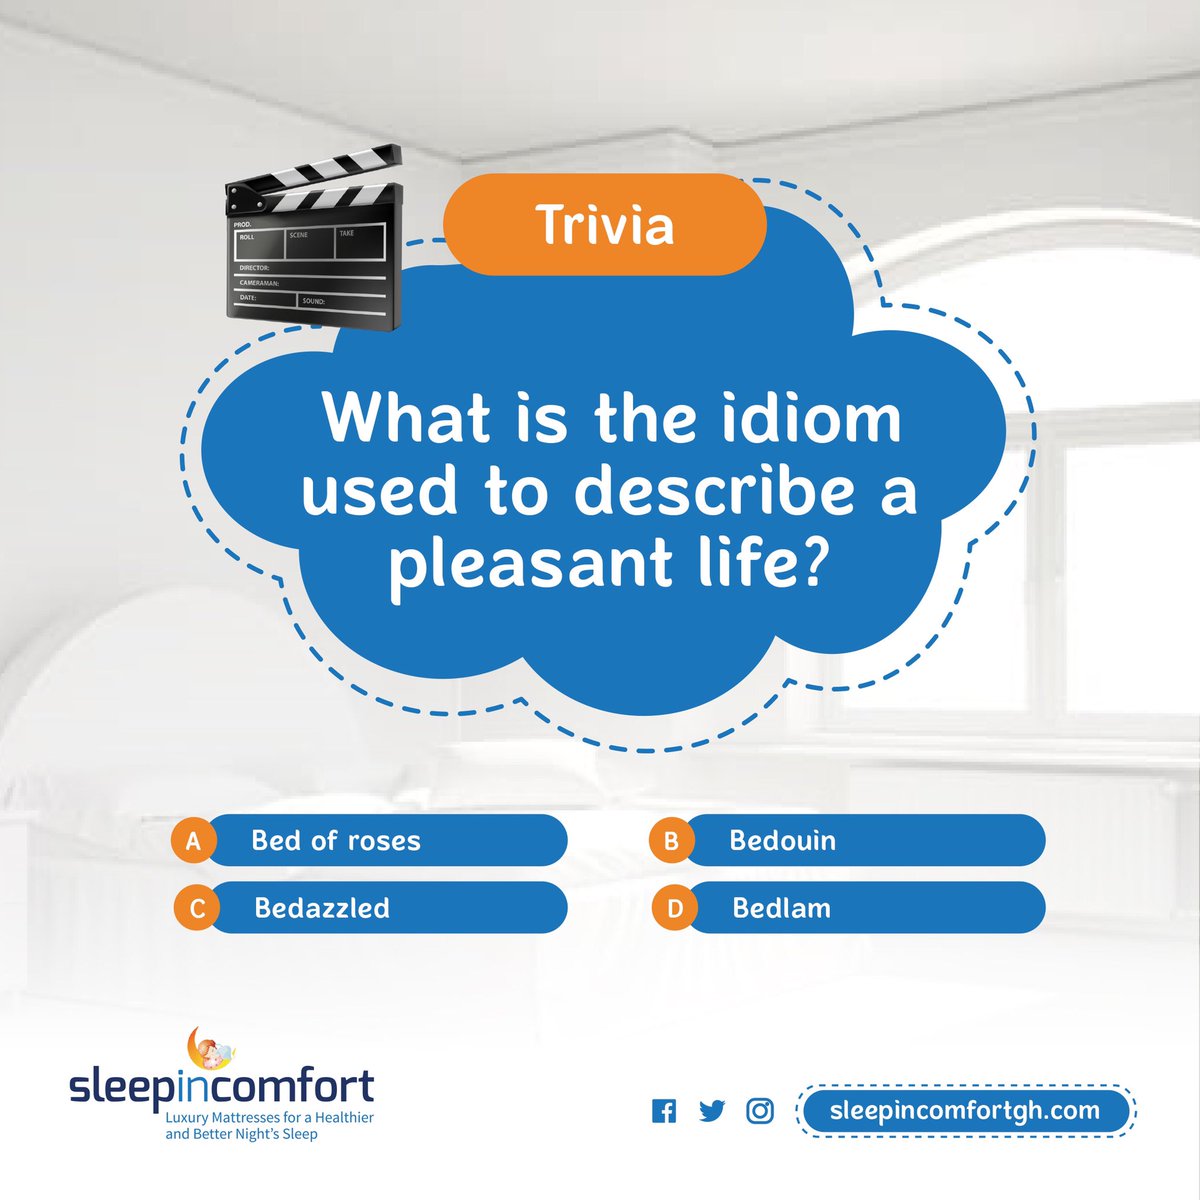 Pleasant life= Bed...?
Ps. You wouldn’t want to slack on the good life, sleep on a comfortable mattress... our mattress 😉

#SleepInStyleAndComfort #sleepincomfort #sleeptrivia #sleepwell #sleeptrivia